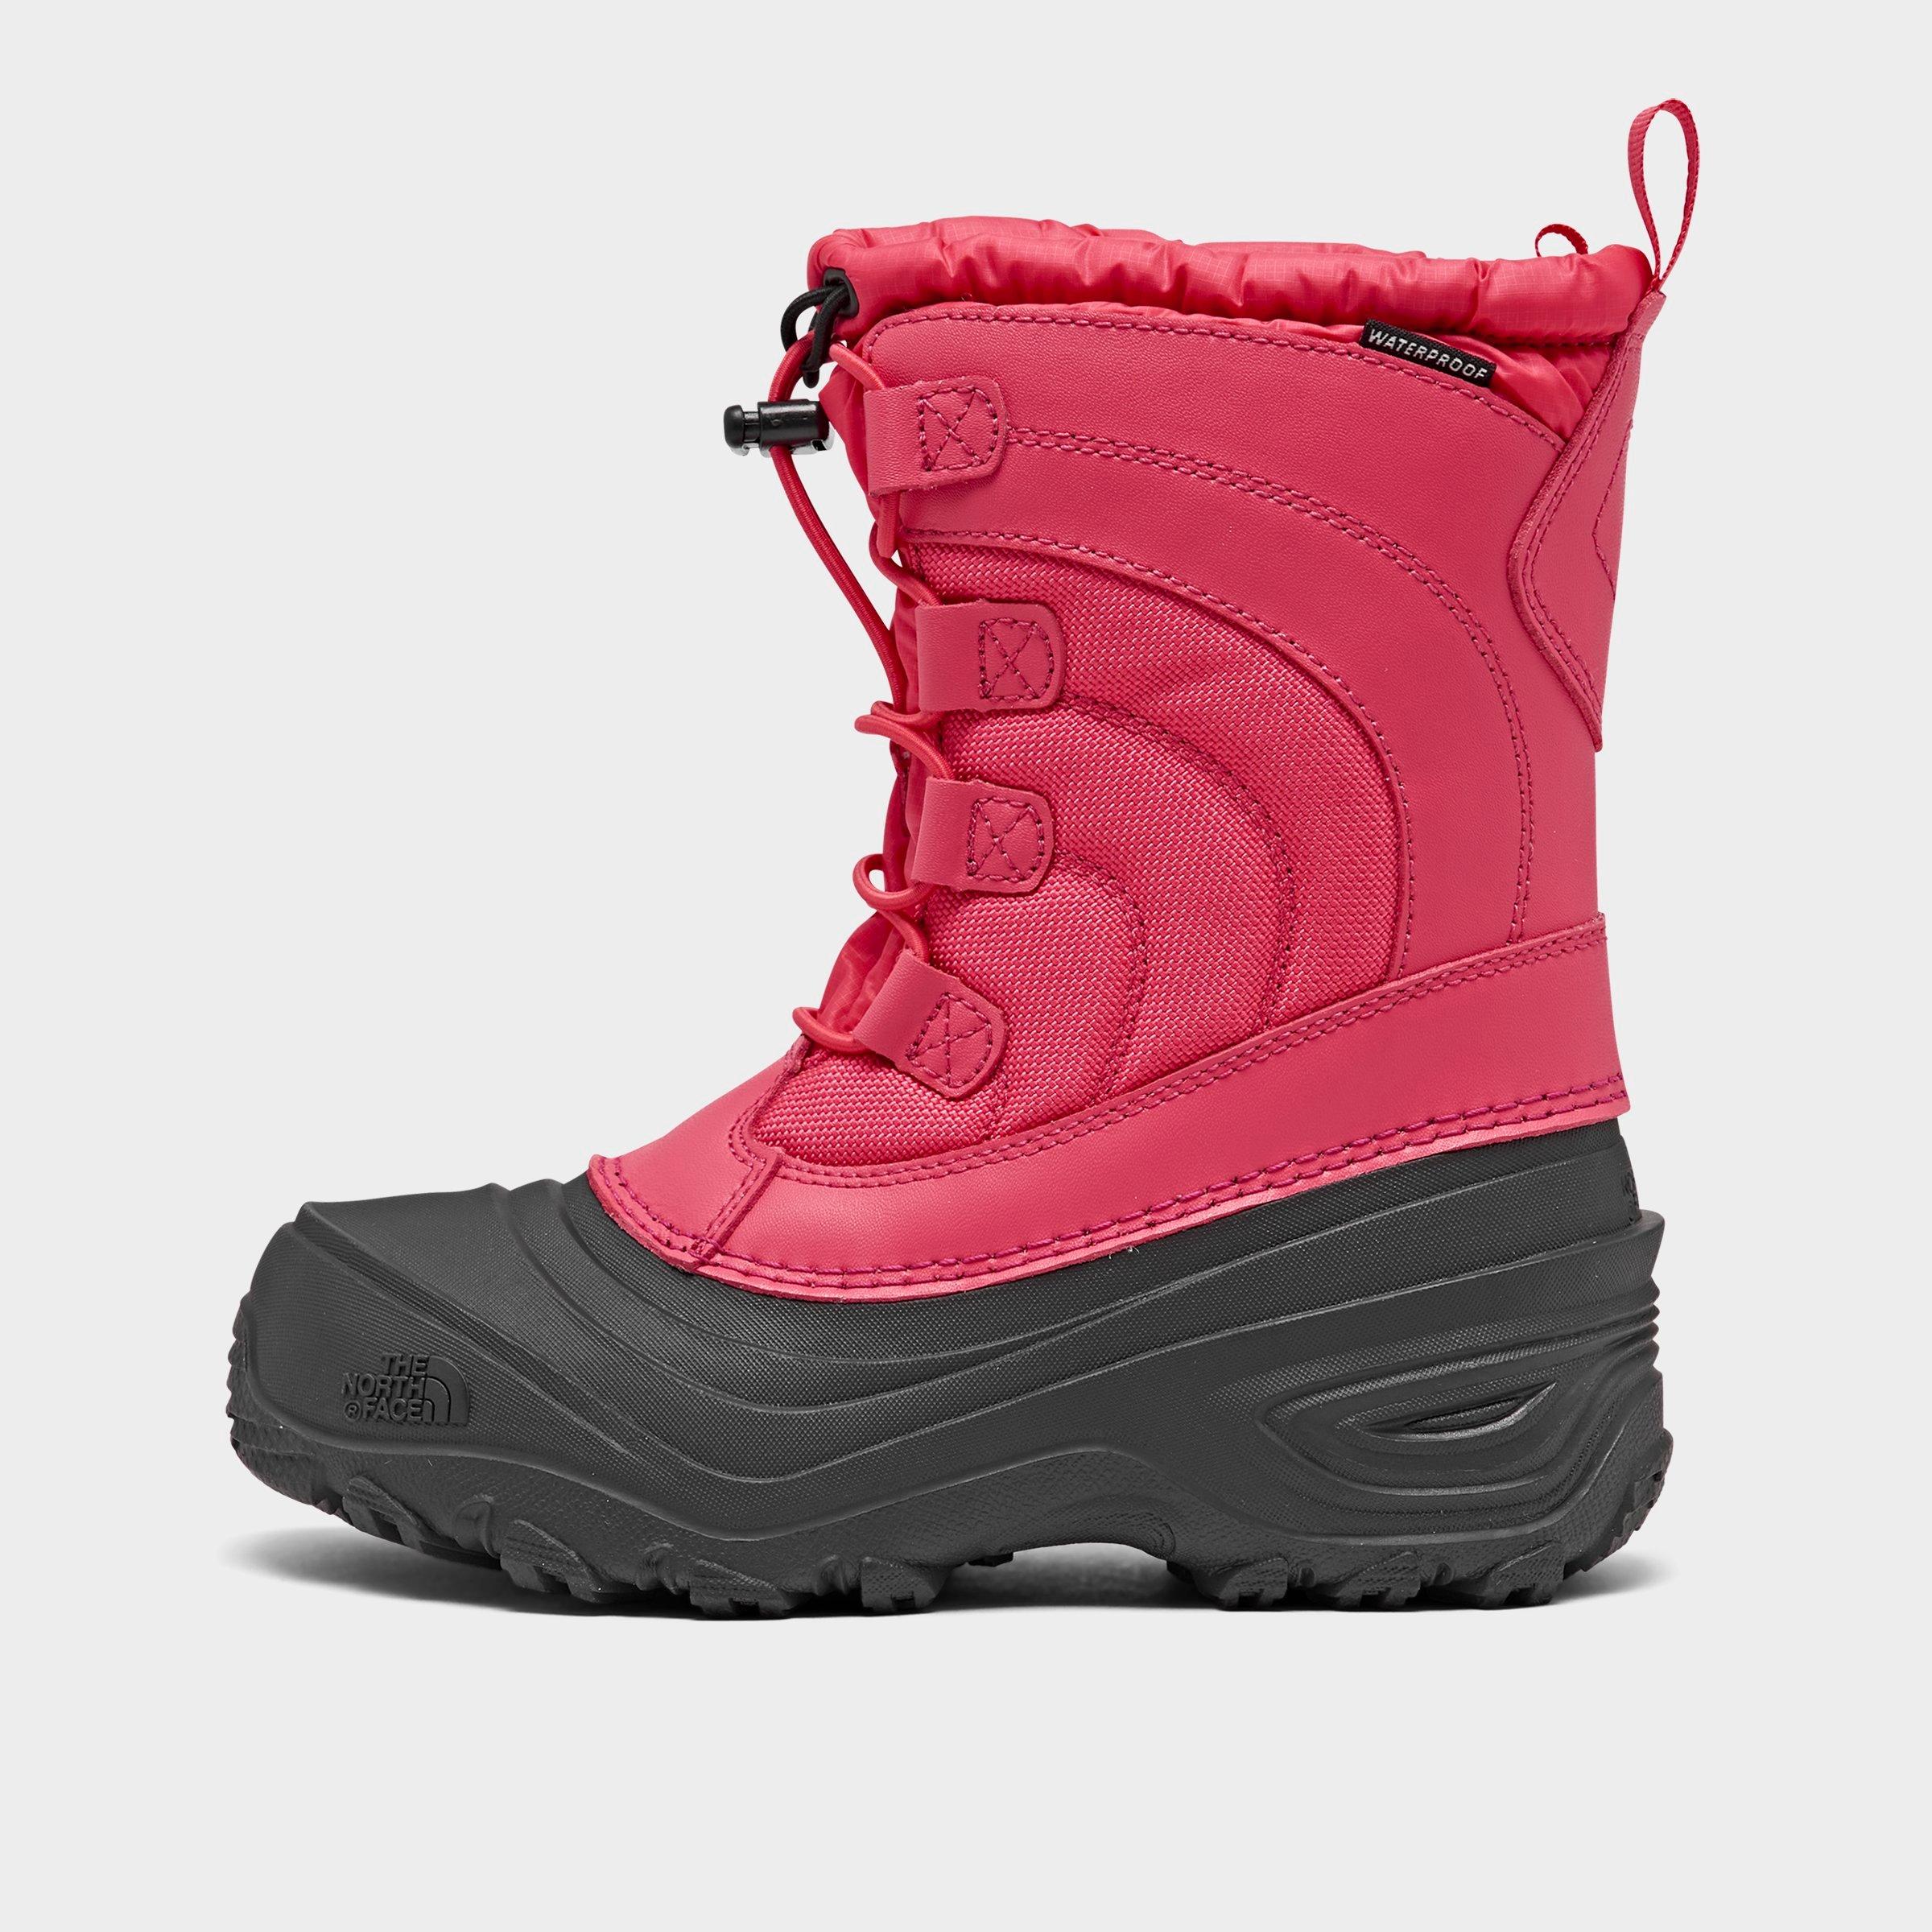 jd sports north face boots